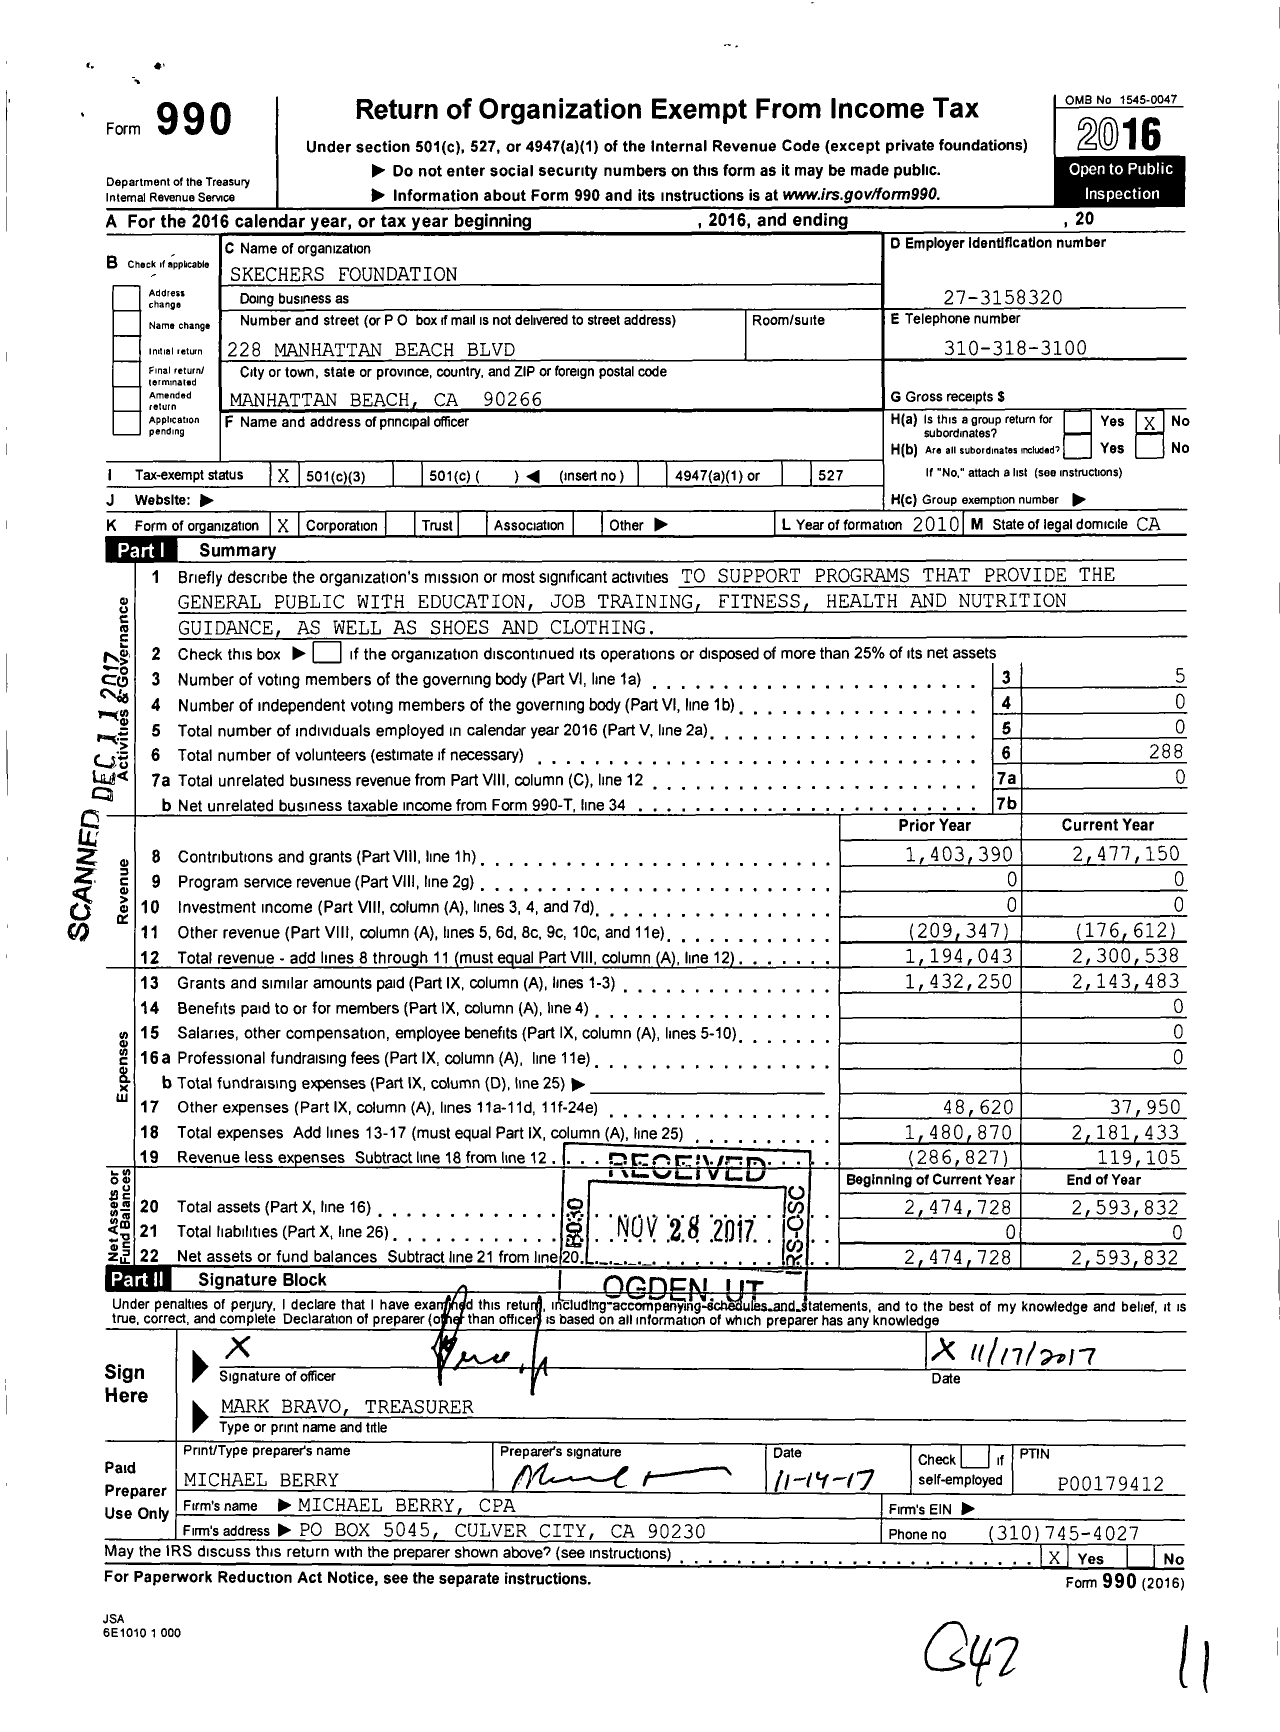 Image of first page of 2016 Form 990 for Skechers Foundation